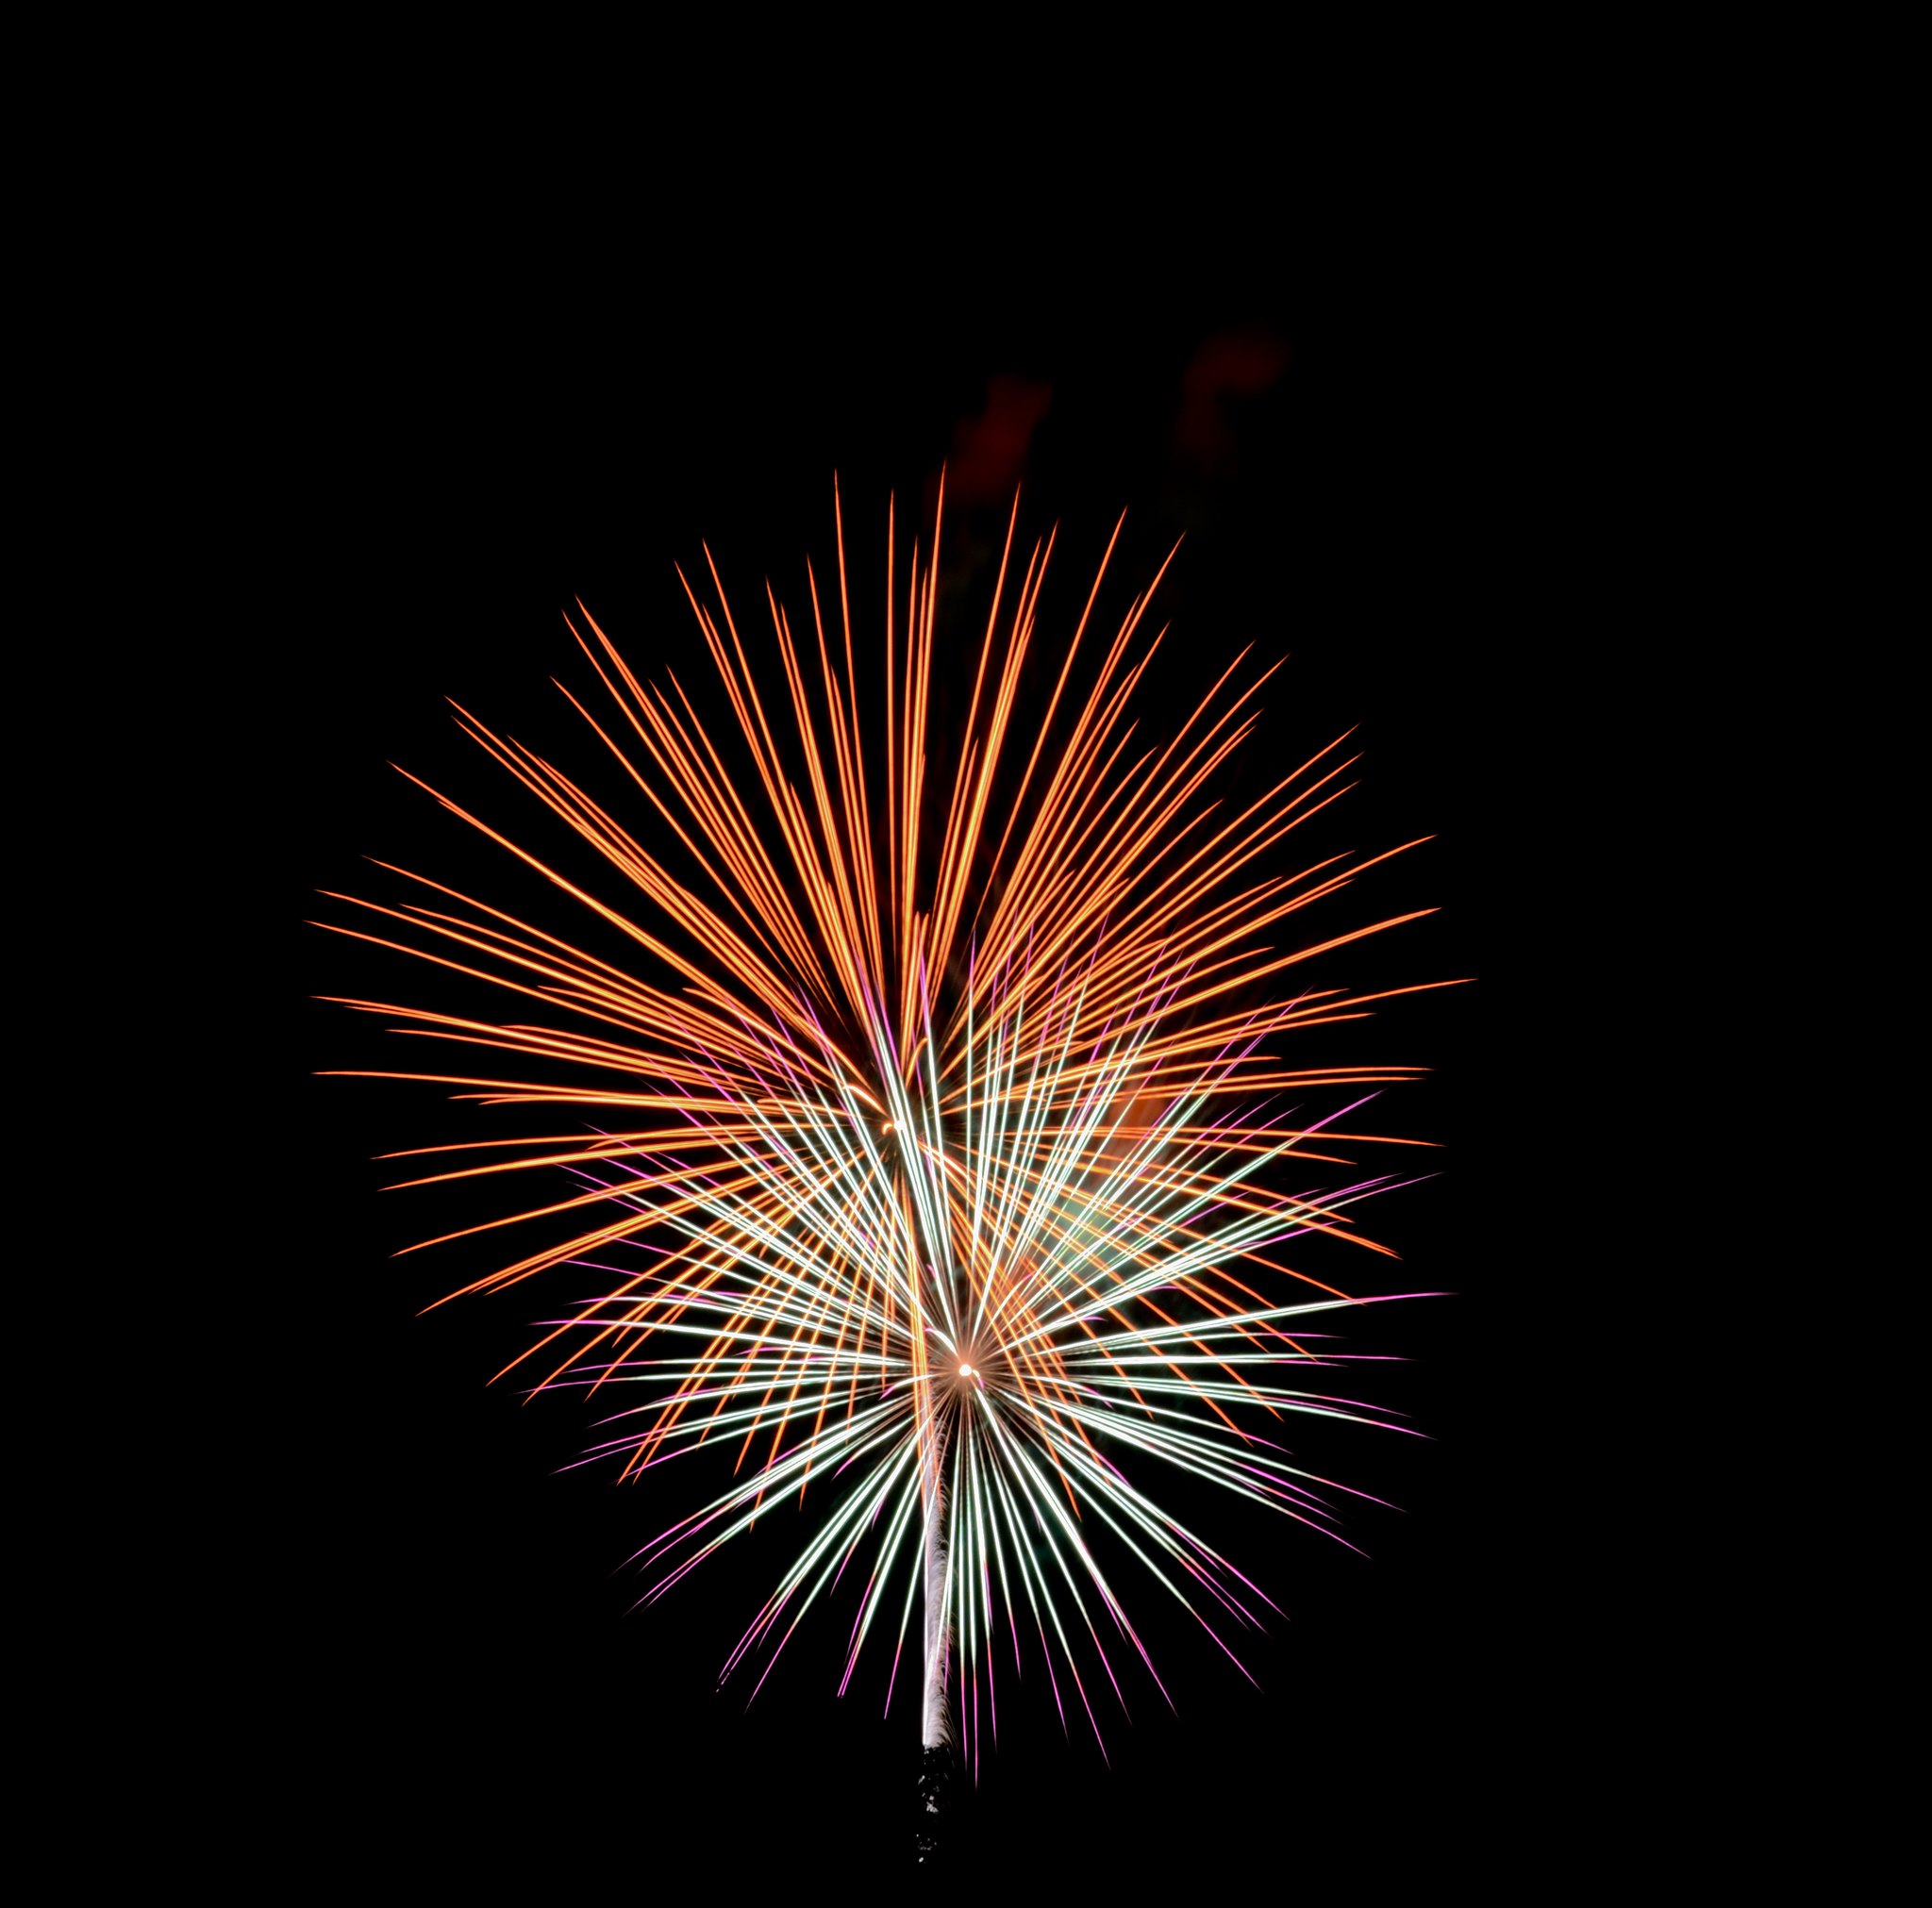 holidays, salute, black, sparks, glow, handsomely, it's beautiful phone wallpaper